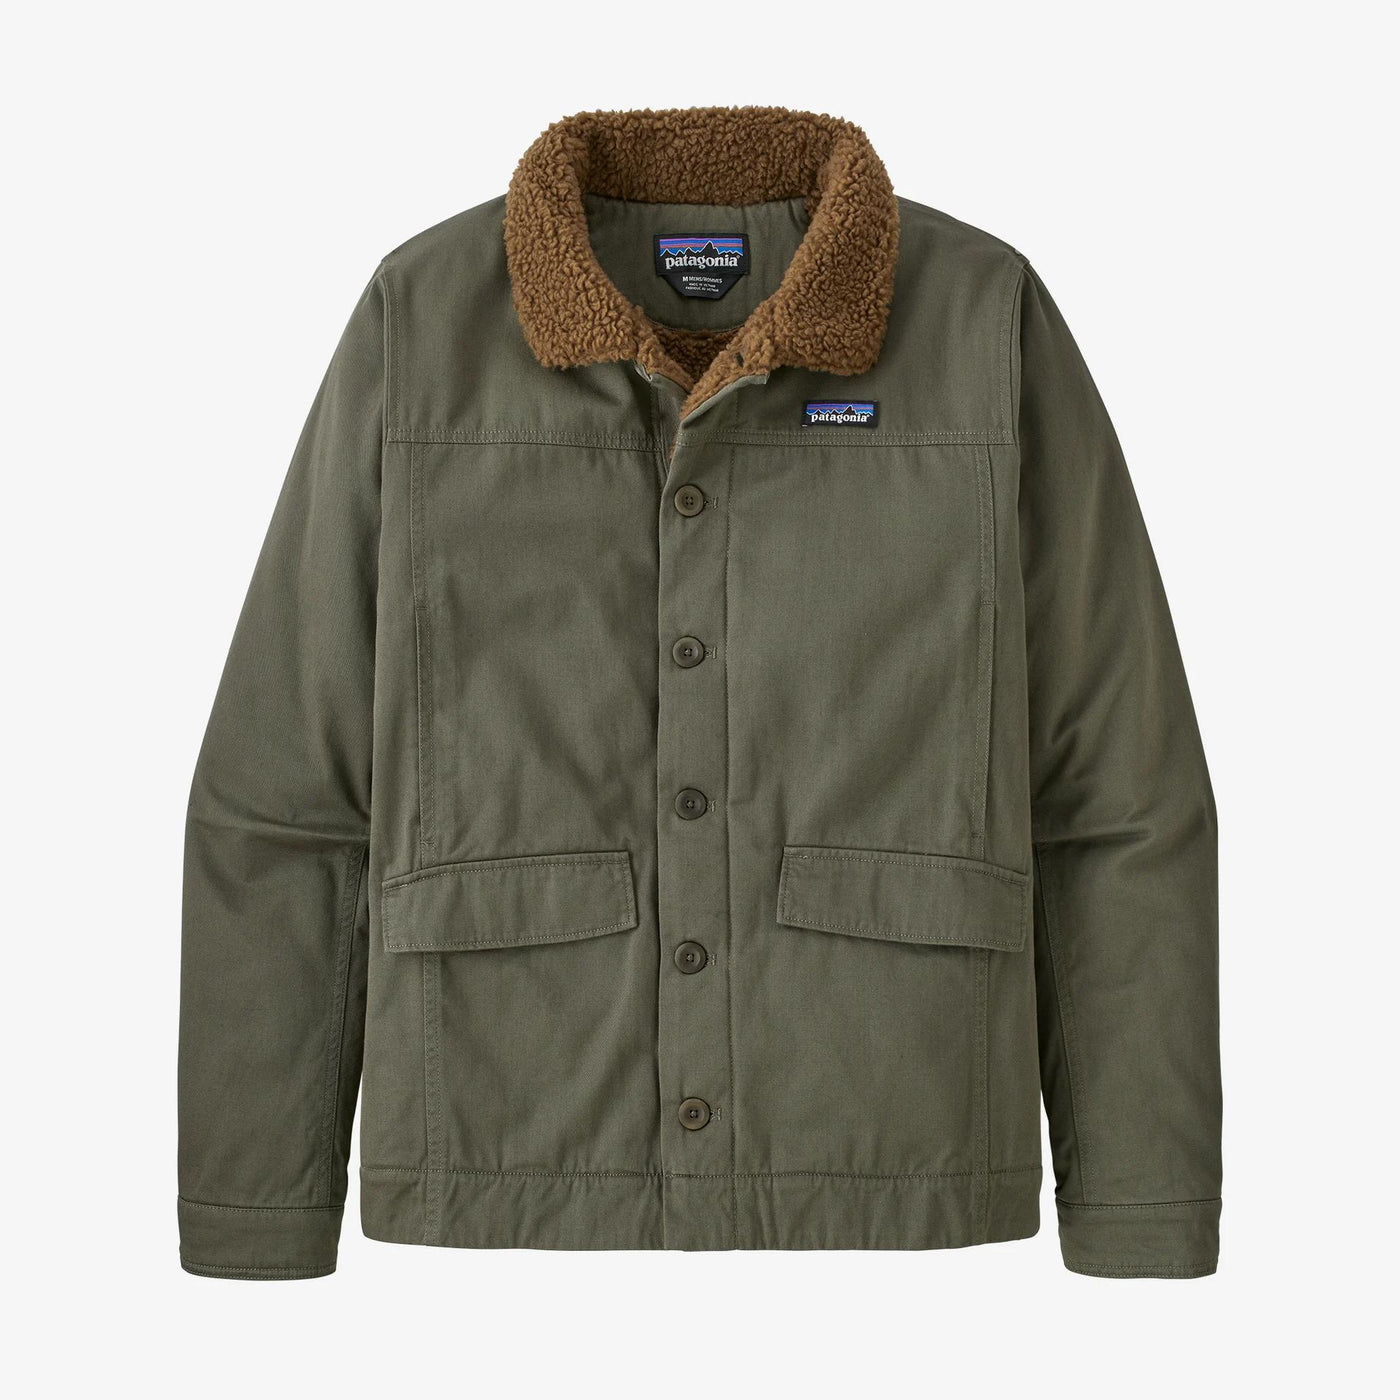 Patagonia Men's Maple Grove Deck Jacket-Men's Clothing-Basin Green-S-Kevin's Fine Outdoor Gear & Apparel